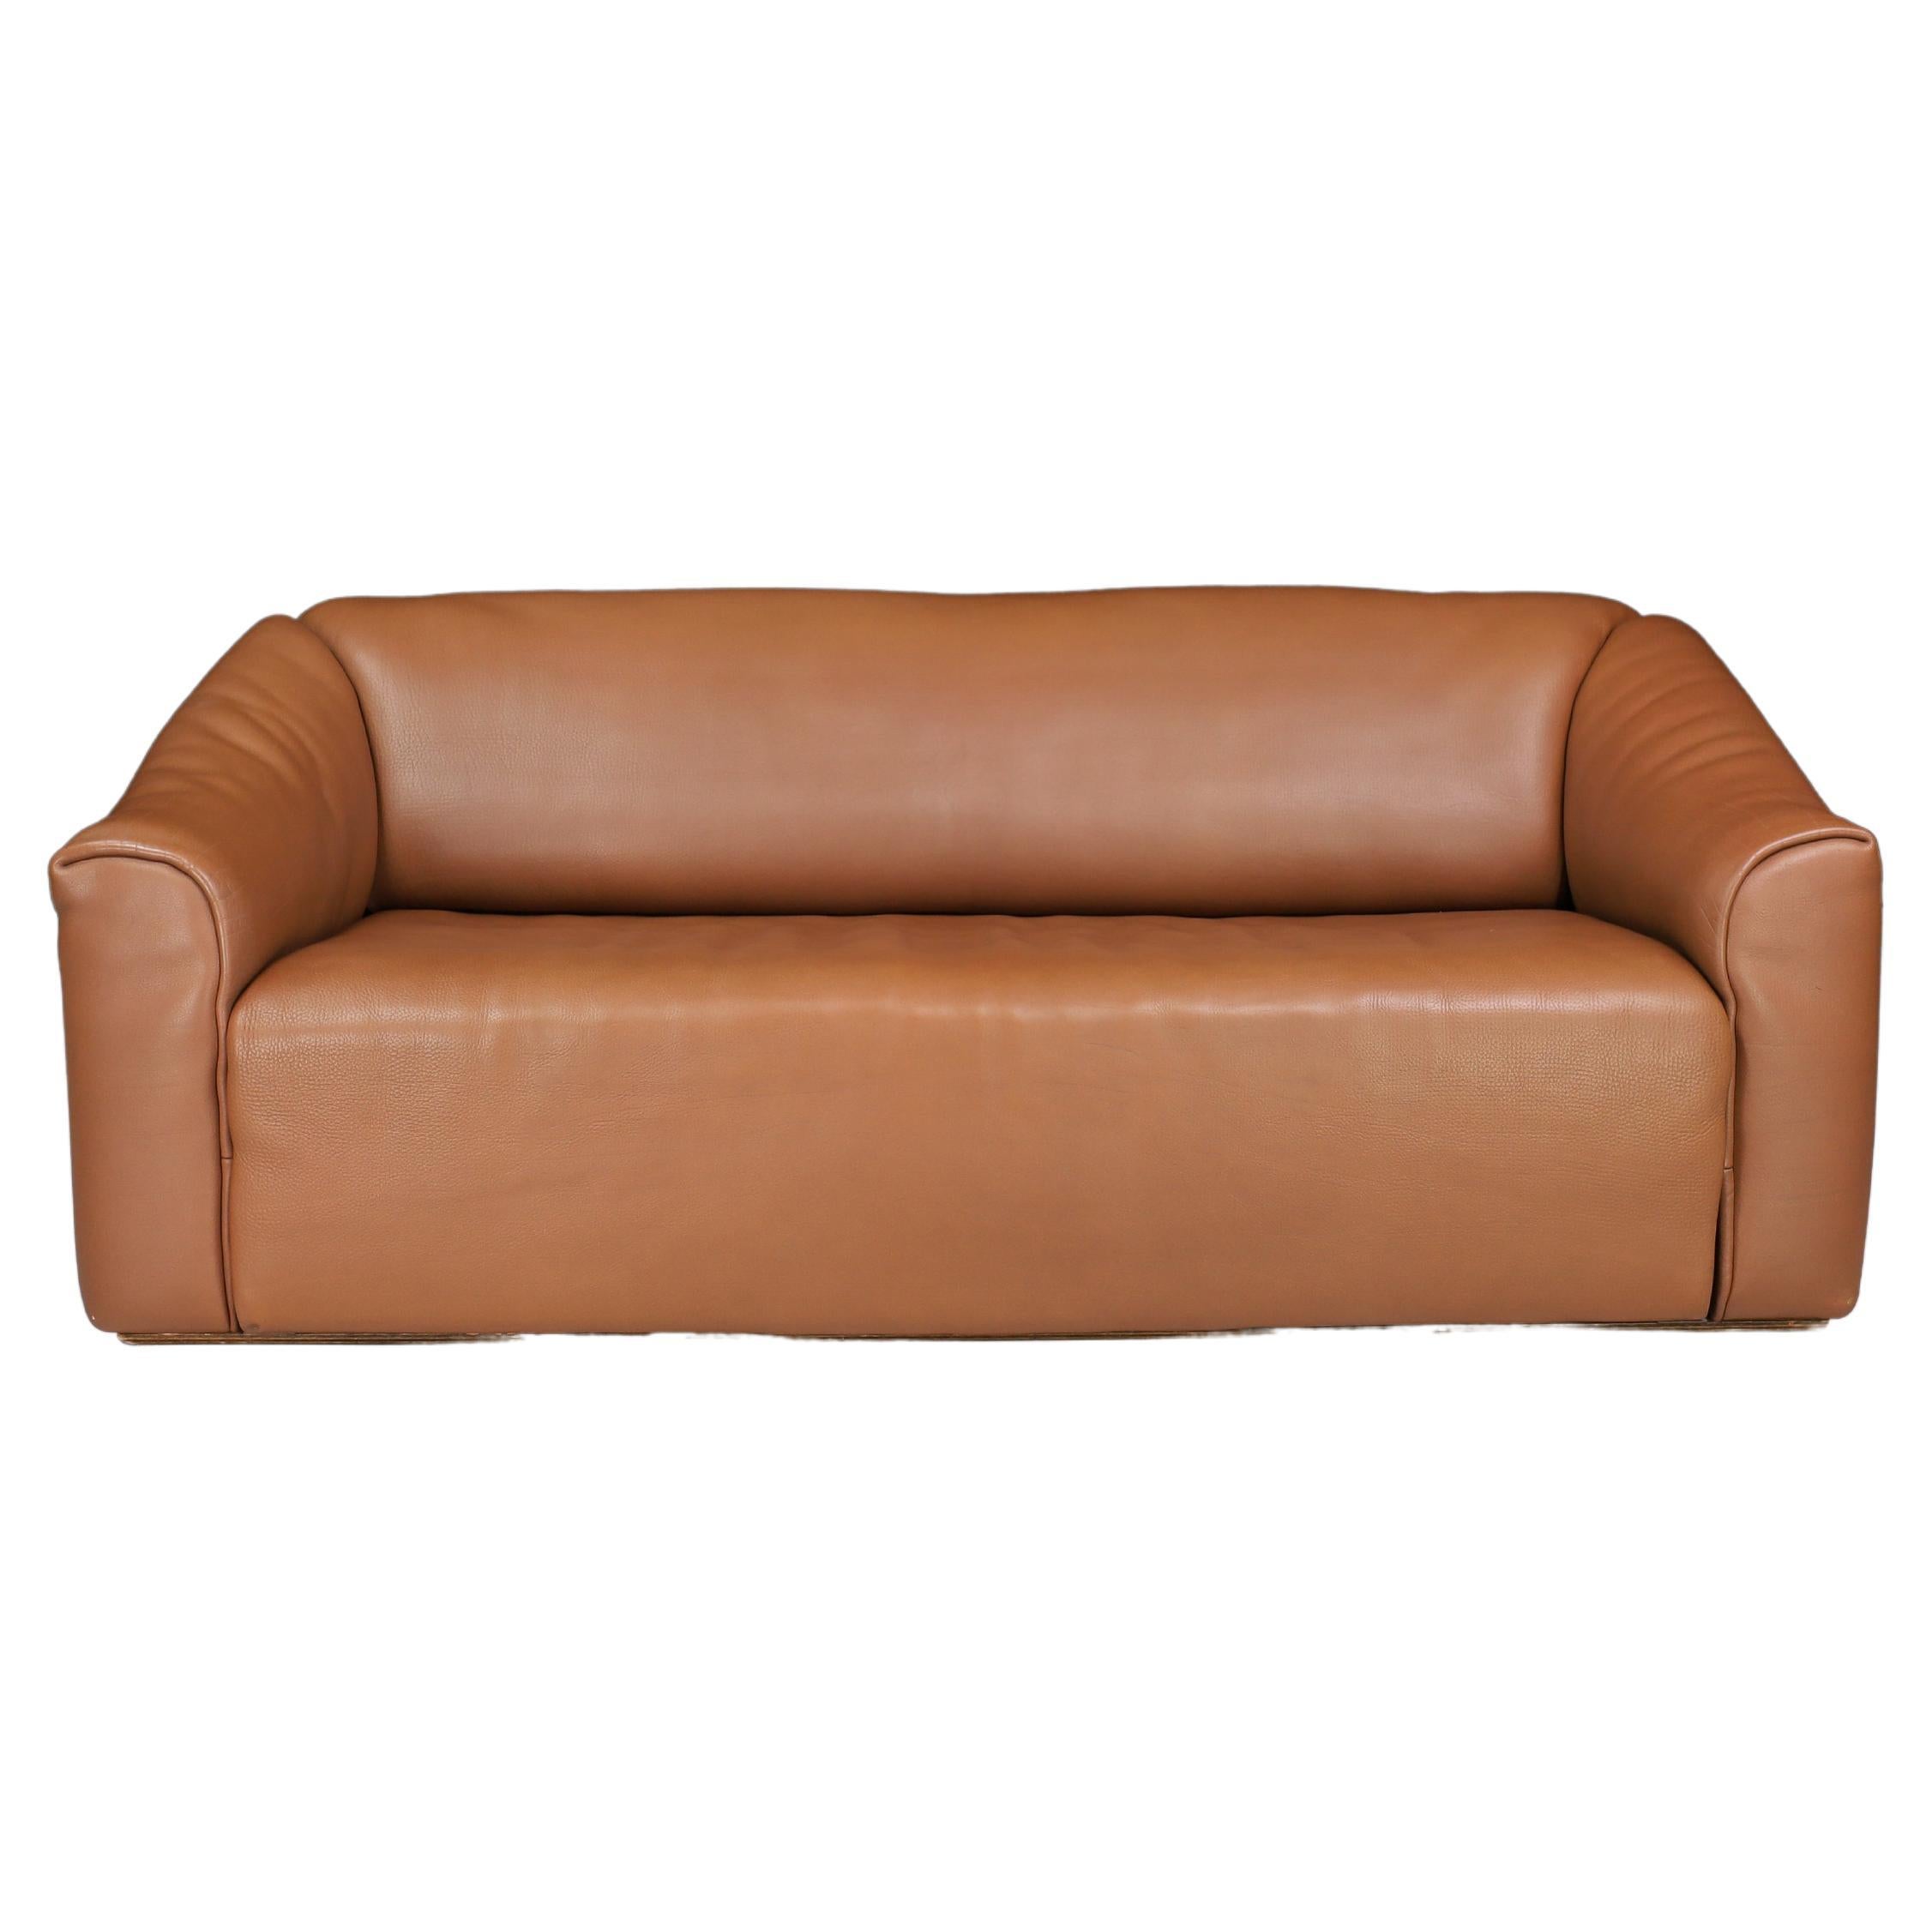 De Sede Ds-47 Brown Neck Leather Sofa from Switzerland, 1970s  For Sale